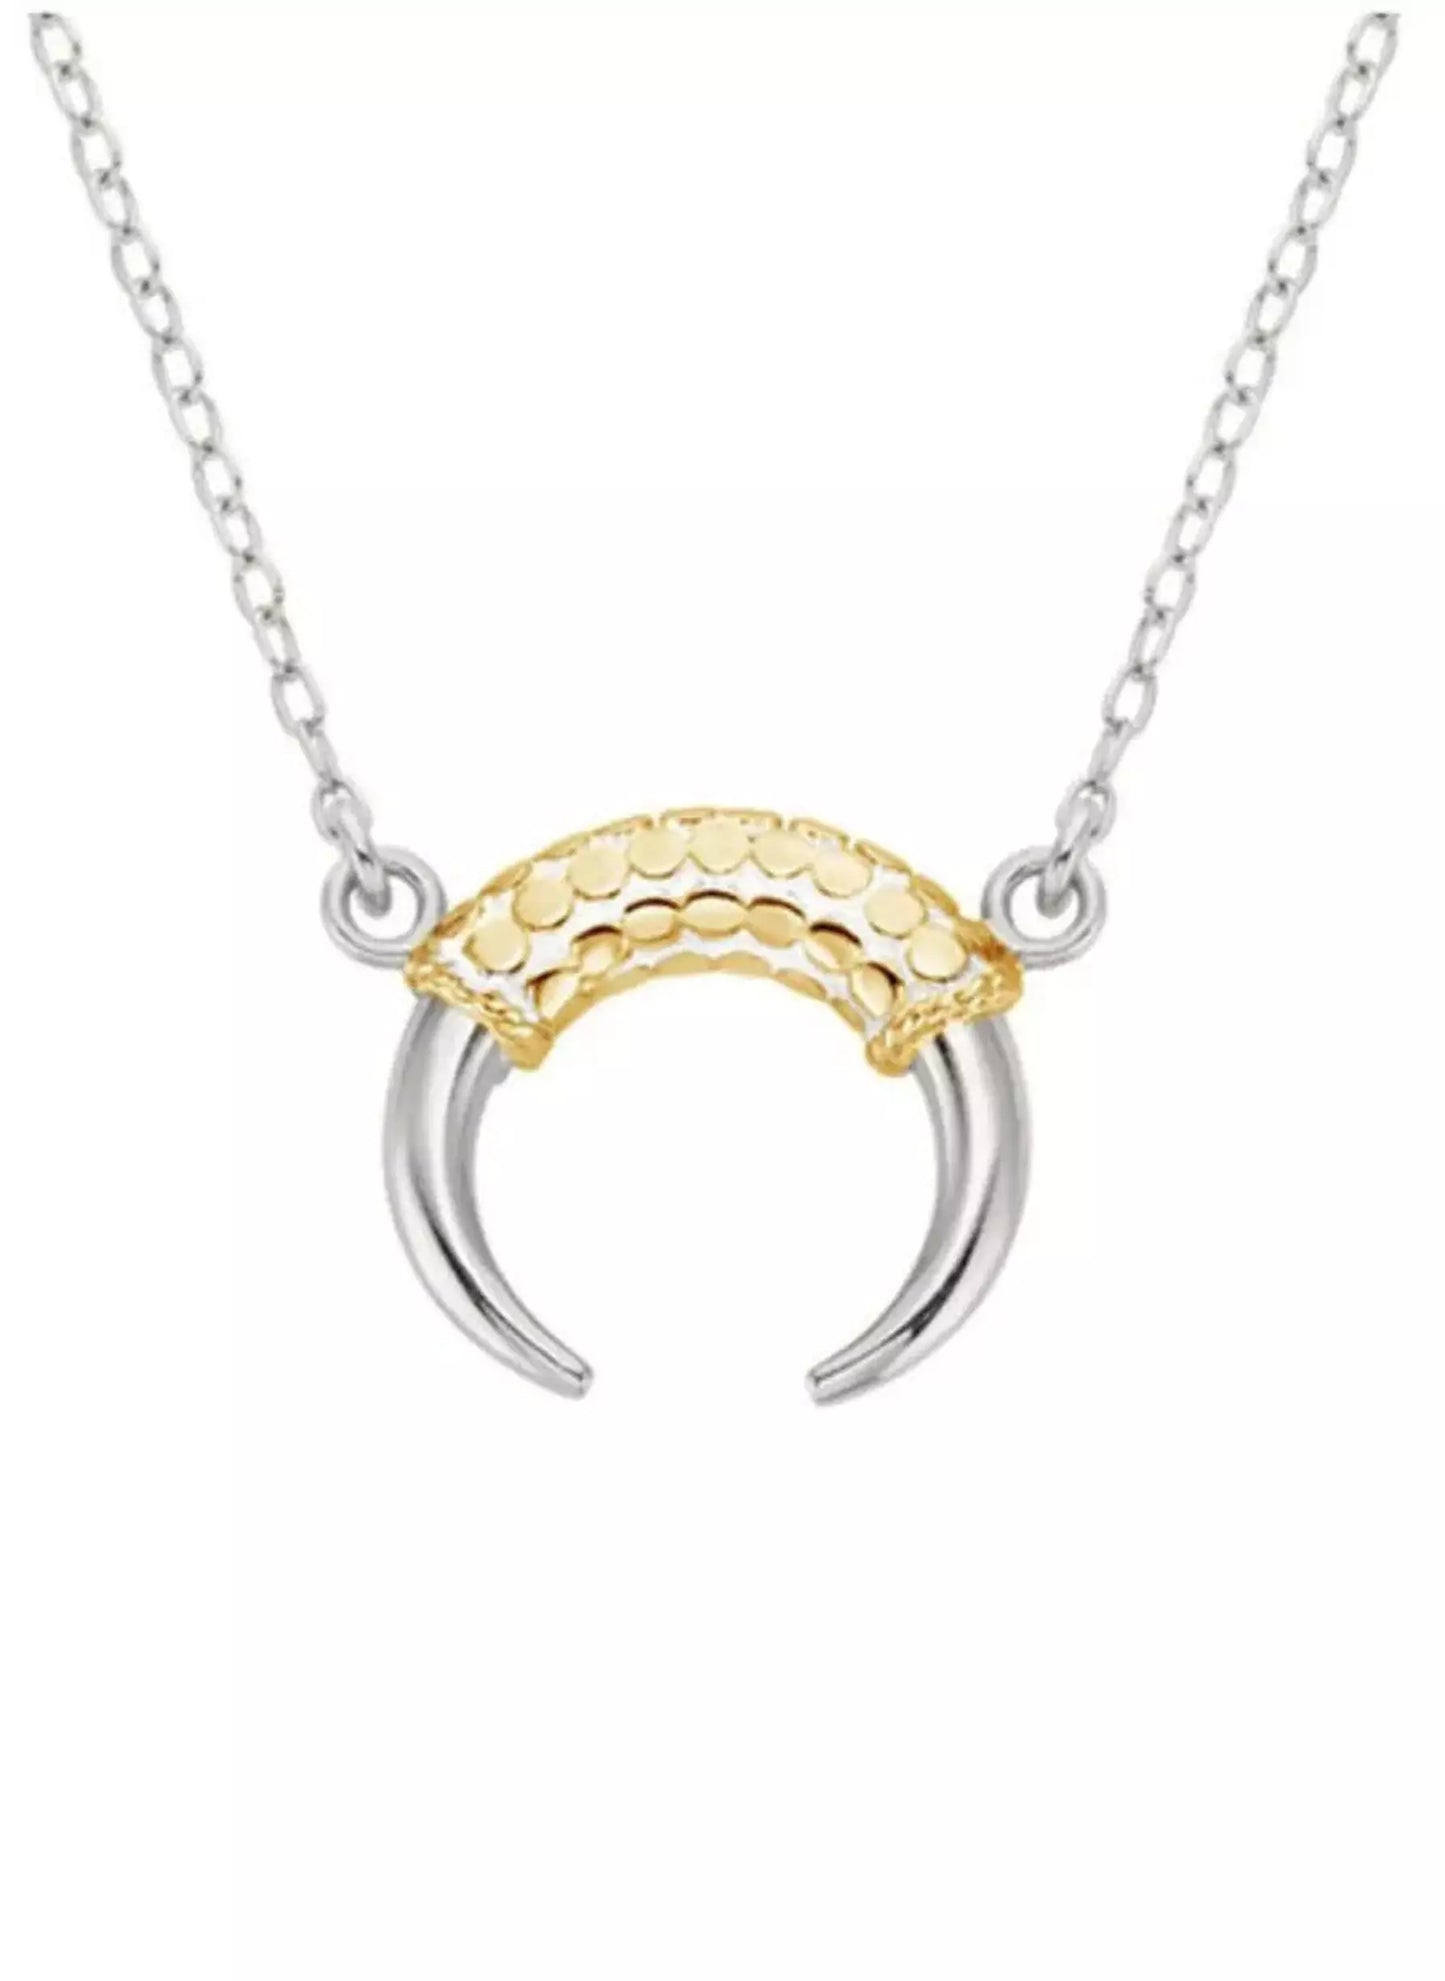 Horn Necklace - Silver & Gold